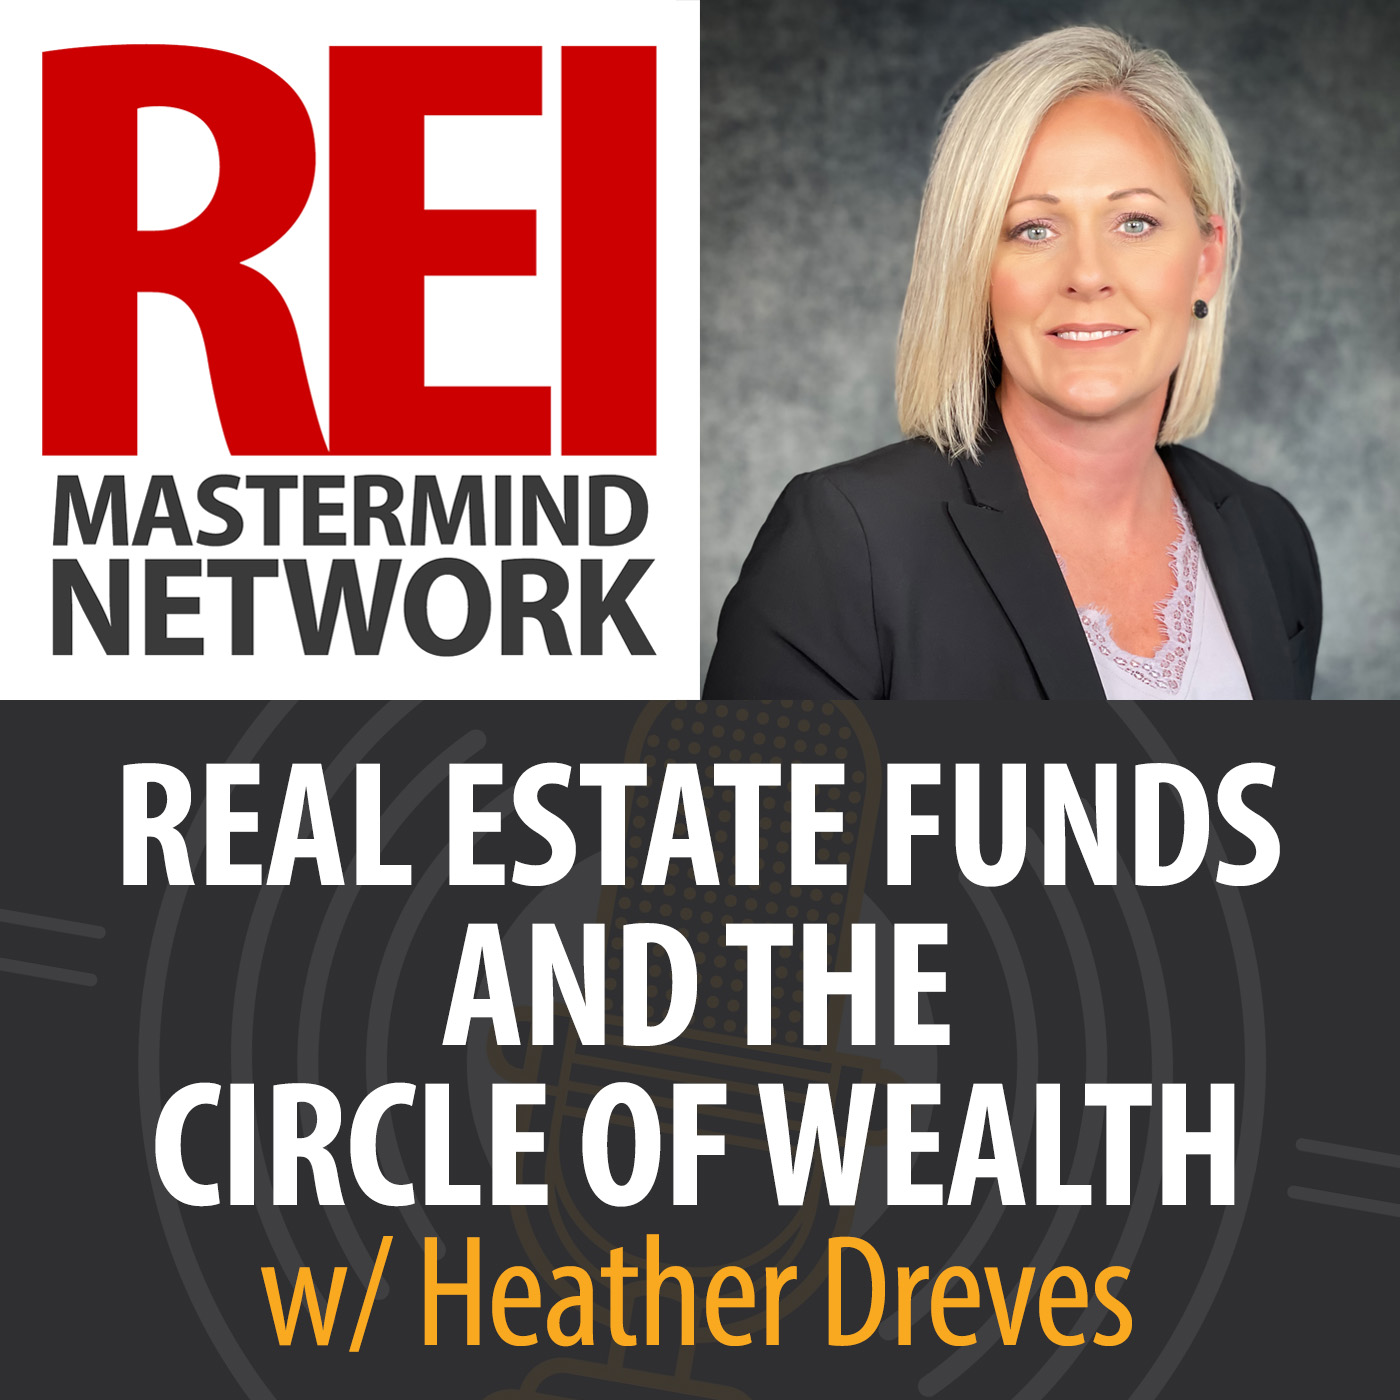 Real Estate Funds and The Circle of Wealth with Heather Dreves Image